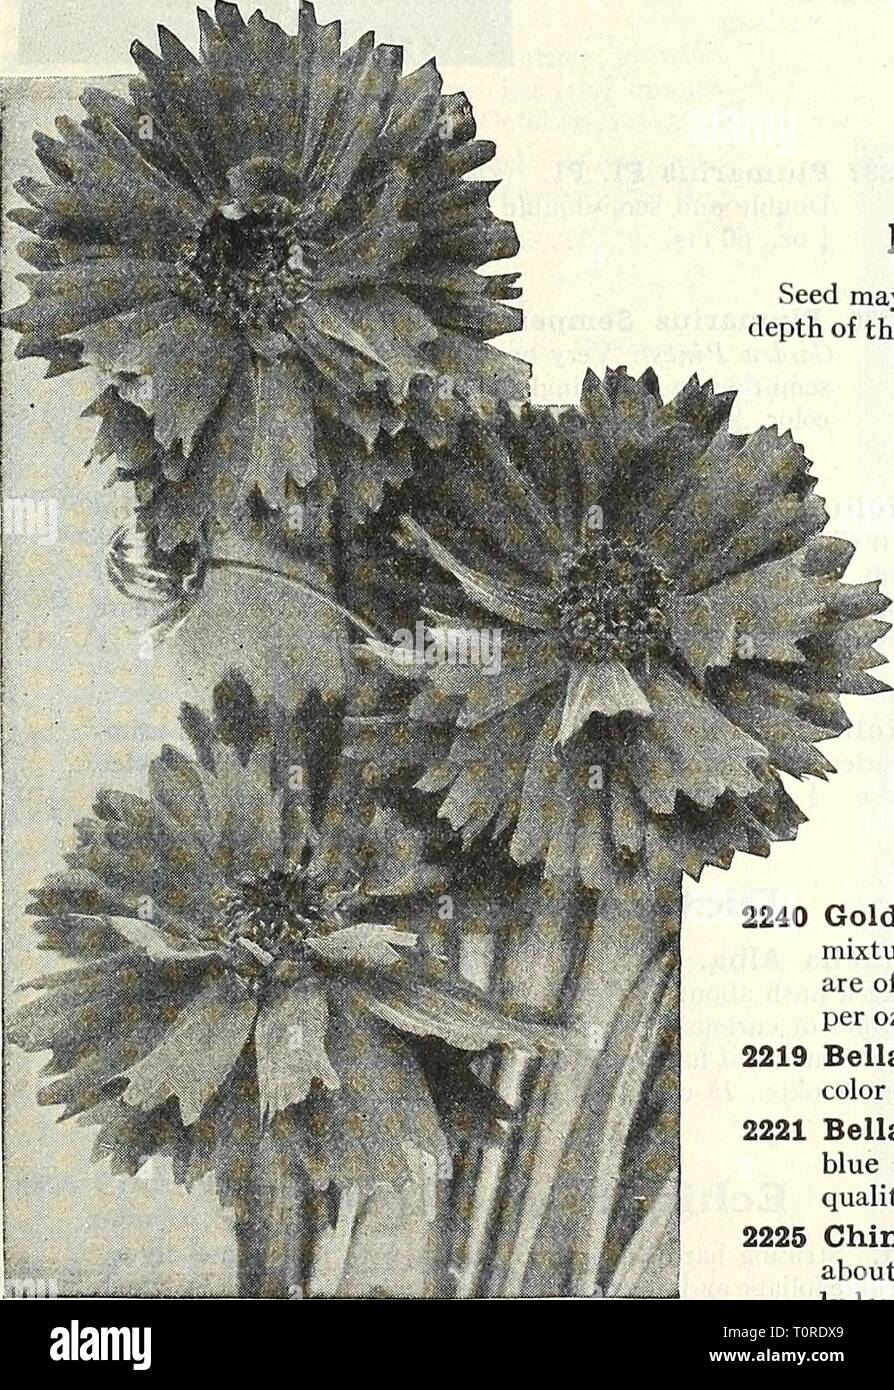 Dreer's autumn catalogue 1929 (1929) Dreer's autumn catalogue 1929  dreersautumncata1929henr Year: 1929  81 Coreopsis per pkt 2071 Lanceolata Grandiflora. This is one of the finest hardy plants, with large, showy bright yellow flowers, produced in the greatest abundance from June till ^t^fw^smr â Â» Â«tjÂ«'Â«wiÂ»iÂ»3^Ei!Â«Â»BHi '-v^i^' frost. As a cut flower they stand near the head among BHbk^ .*f iK'.'^^^^S^^^  8 '^ jHBg-^&gt; dition a week or more. Easily grown from seed, i oz., ^^H^-^'S^ tK'''' '^^^^^K'Sffi*' t^lfSSR^^ 25cts $010 â â¢S^it-M-v **r'^P^^^'^''!^^^*As 2072 Lanceolata Grandiflor Stock Photo